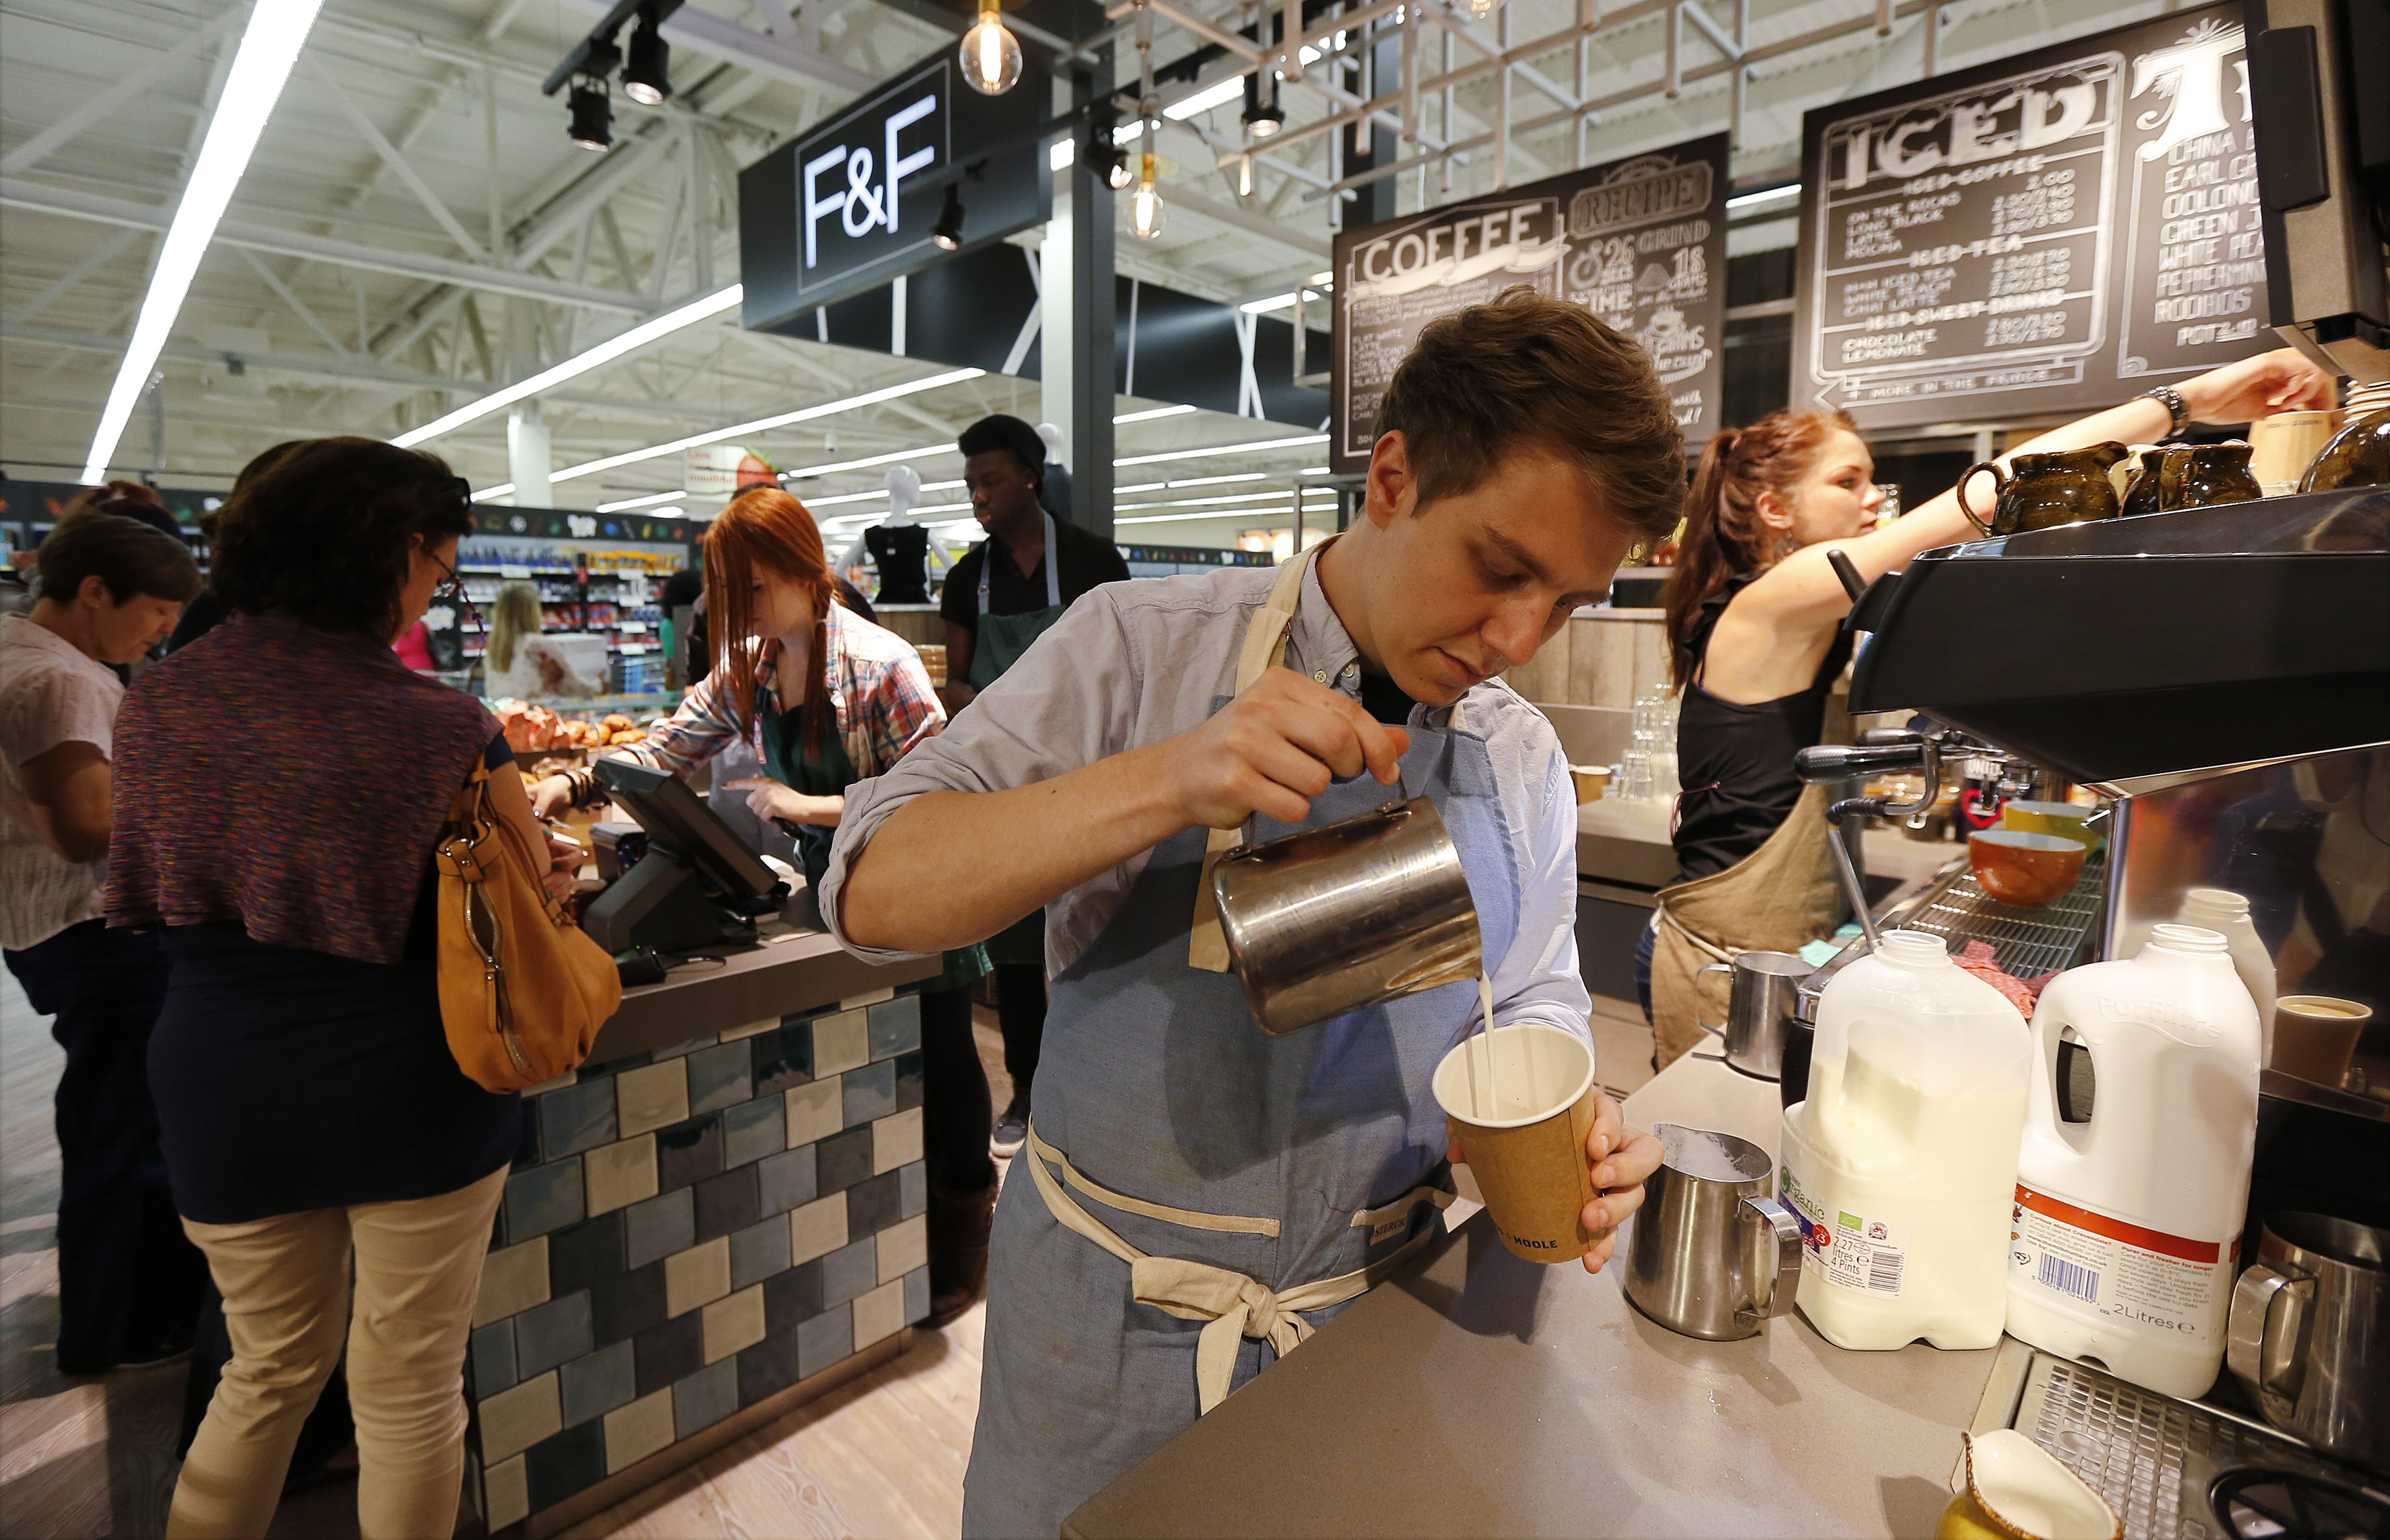 A barista makes a latte at the Harris and Hoole coffee shop inside a Tesco Extra supermarket in Watford, north of London August 8, 2013. Tesco, the world's number three retailer, is hoping the allure of casual dining, coffees and even yoga will help tempt Britons back to its ailing retail park stores as part of a 1 billion pound ($1.55 billion) push to revitalise business. REUTERS/Suzanne Plunkett (BRITAIN - Tags: BUSINESS FOOD) - RTX12DV0